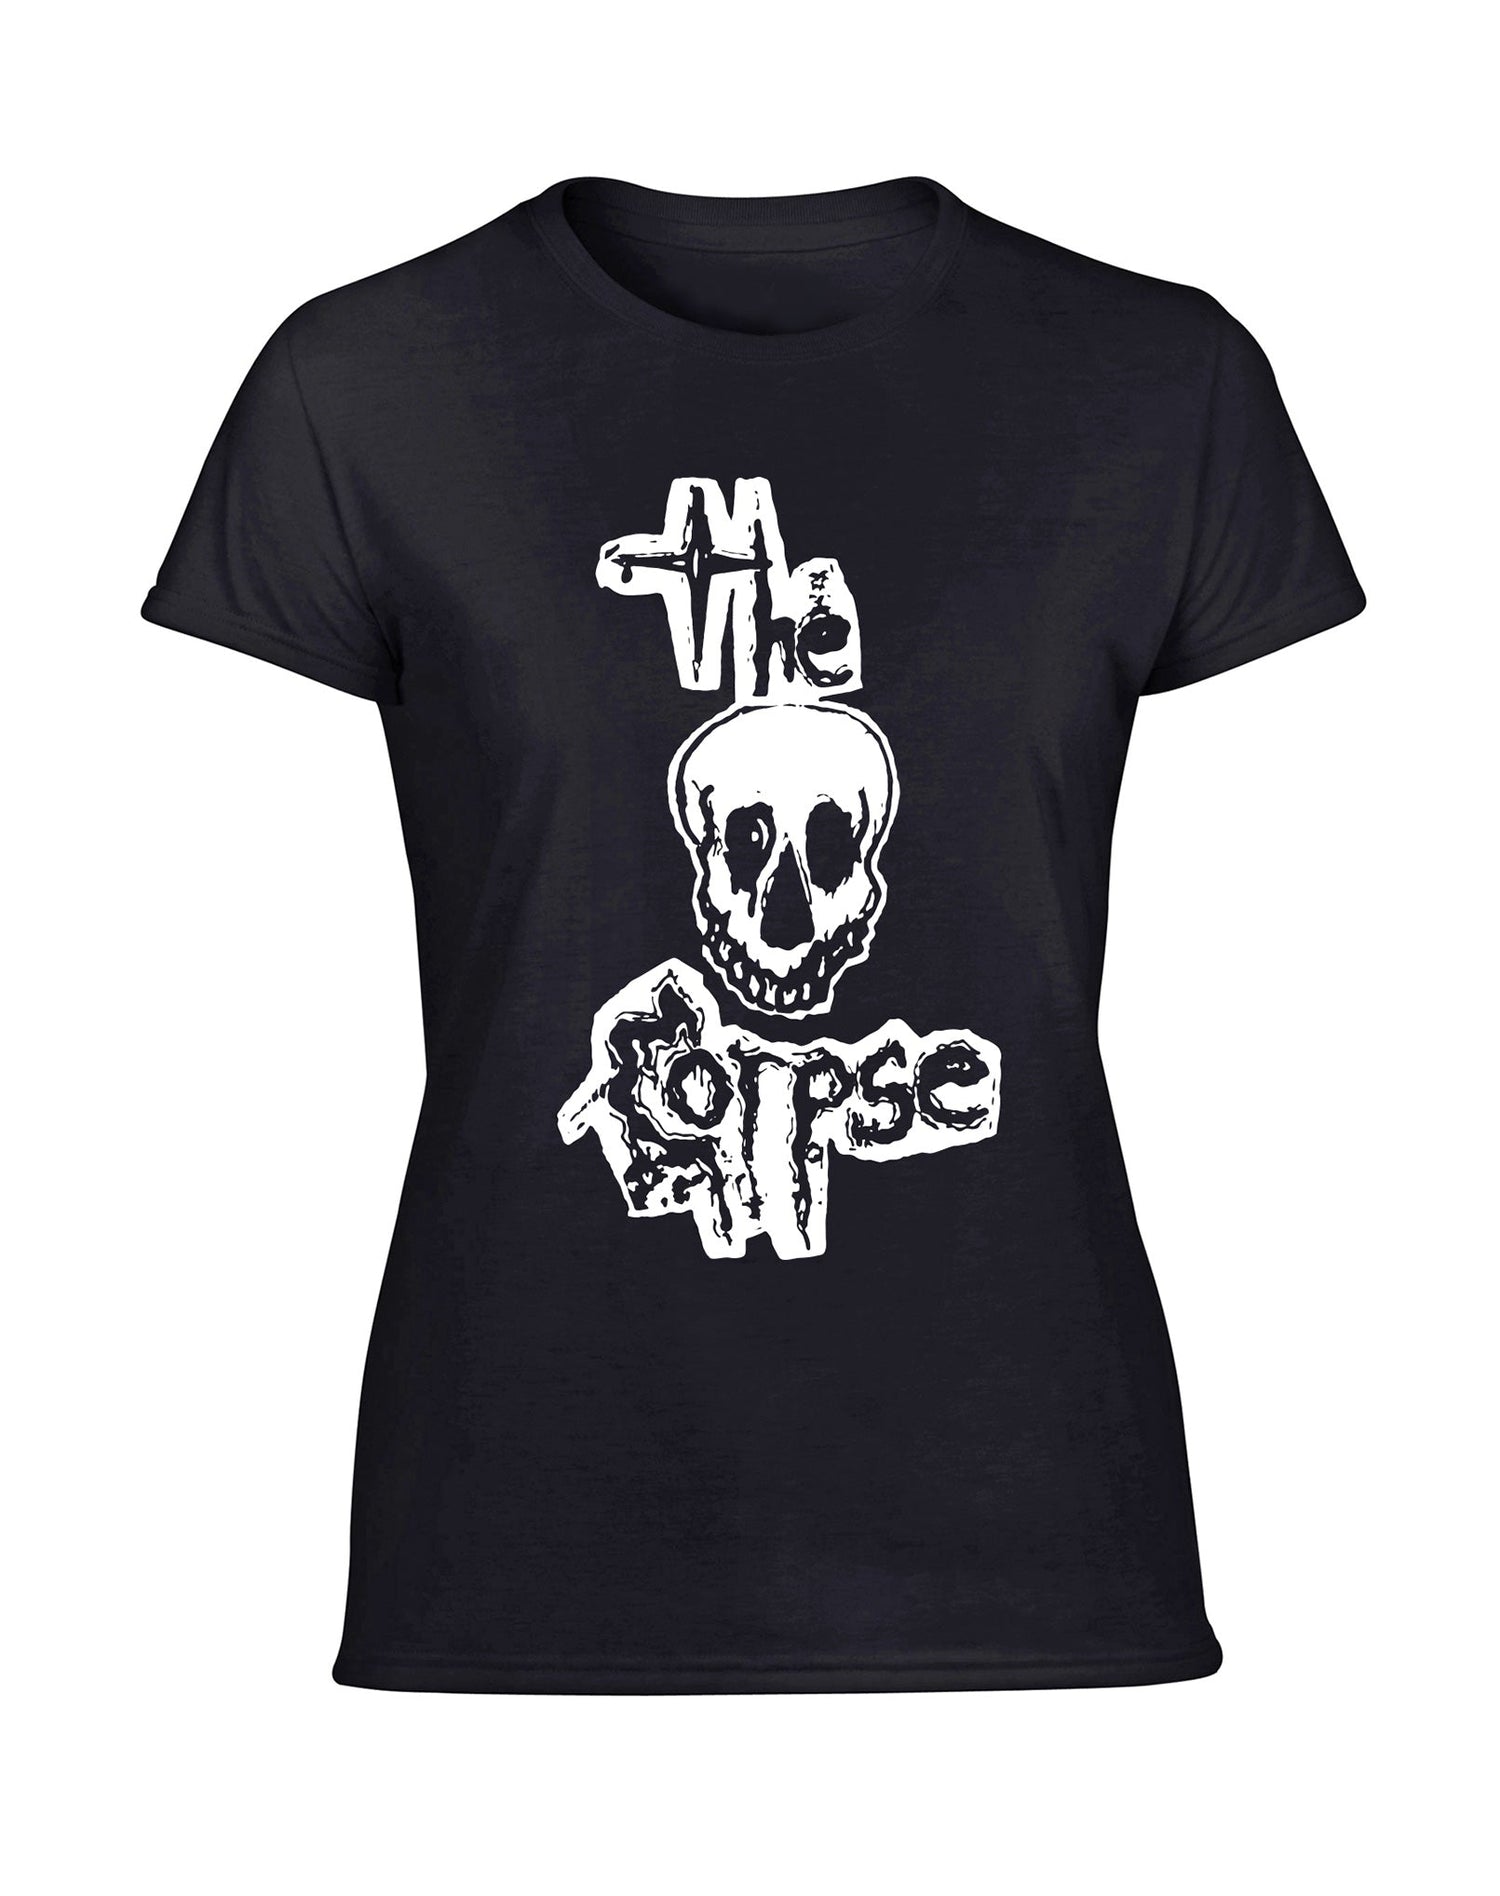 Ladies Fit T-shirts - Chesterfield